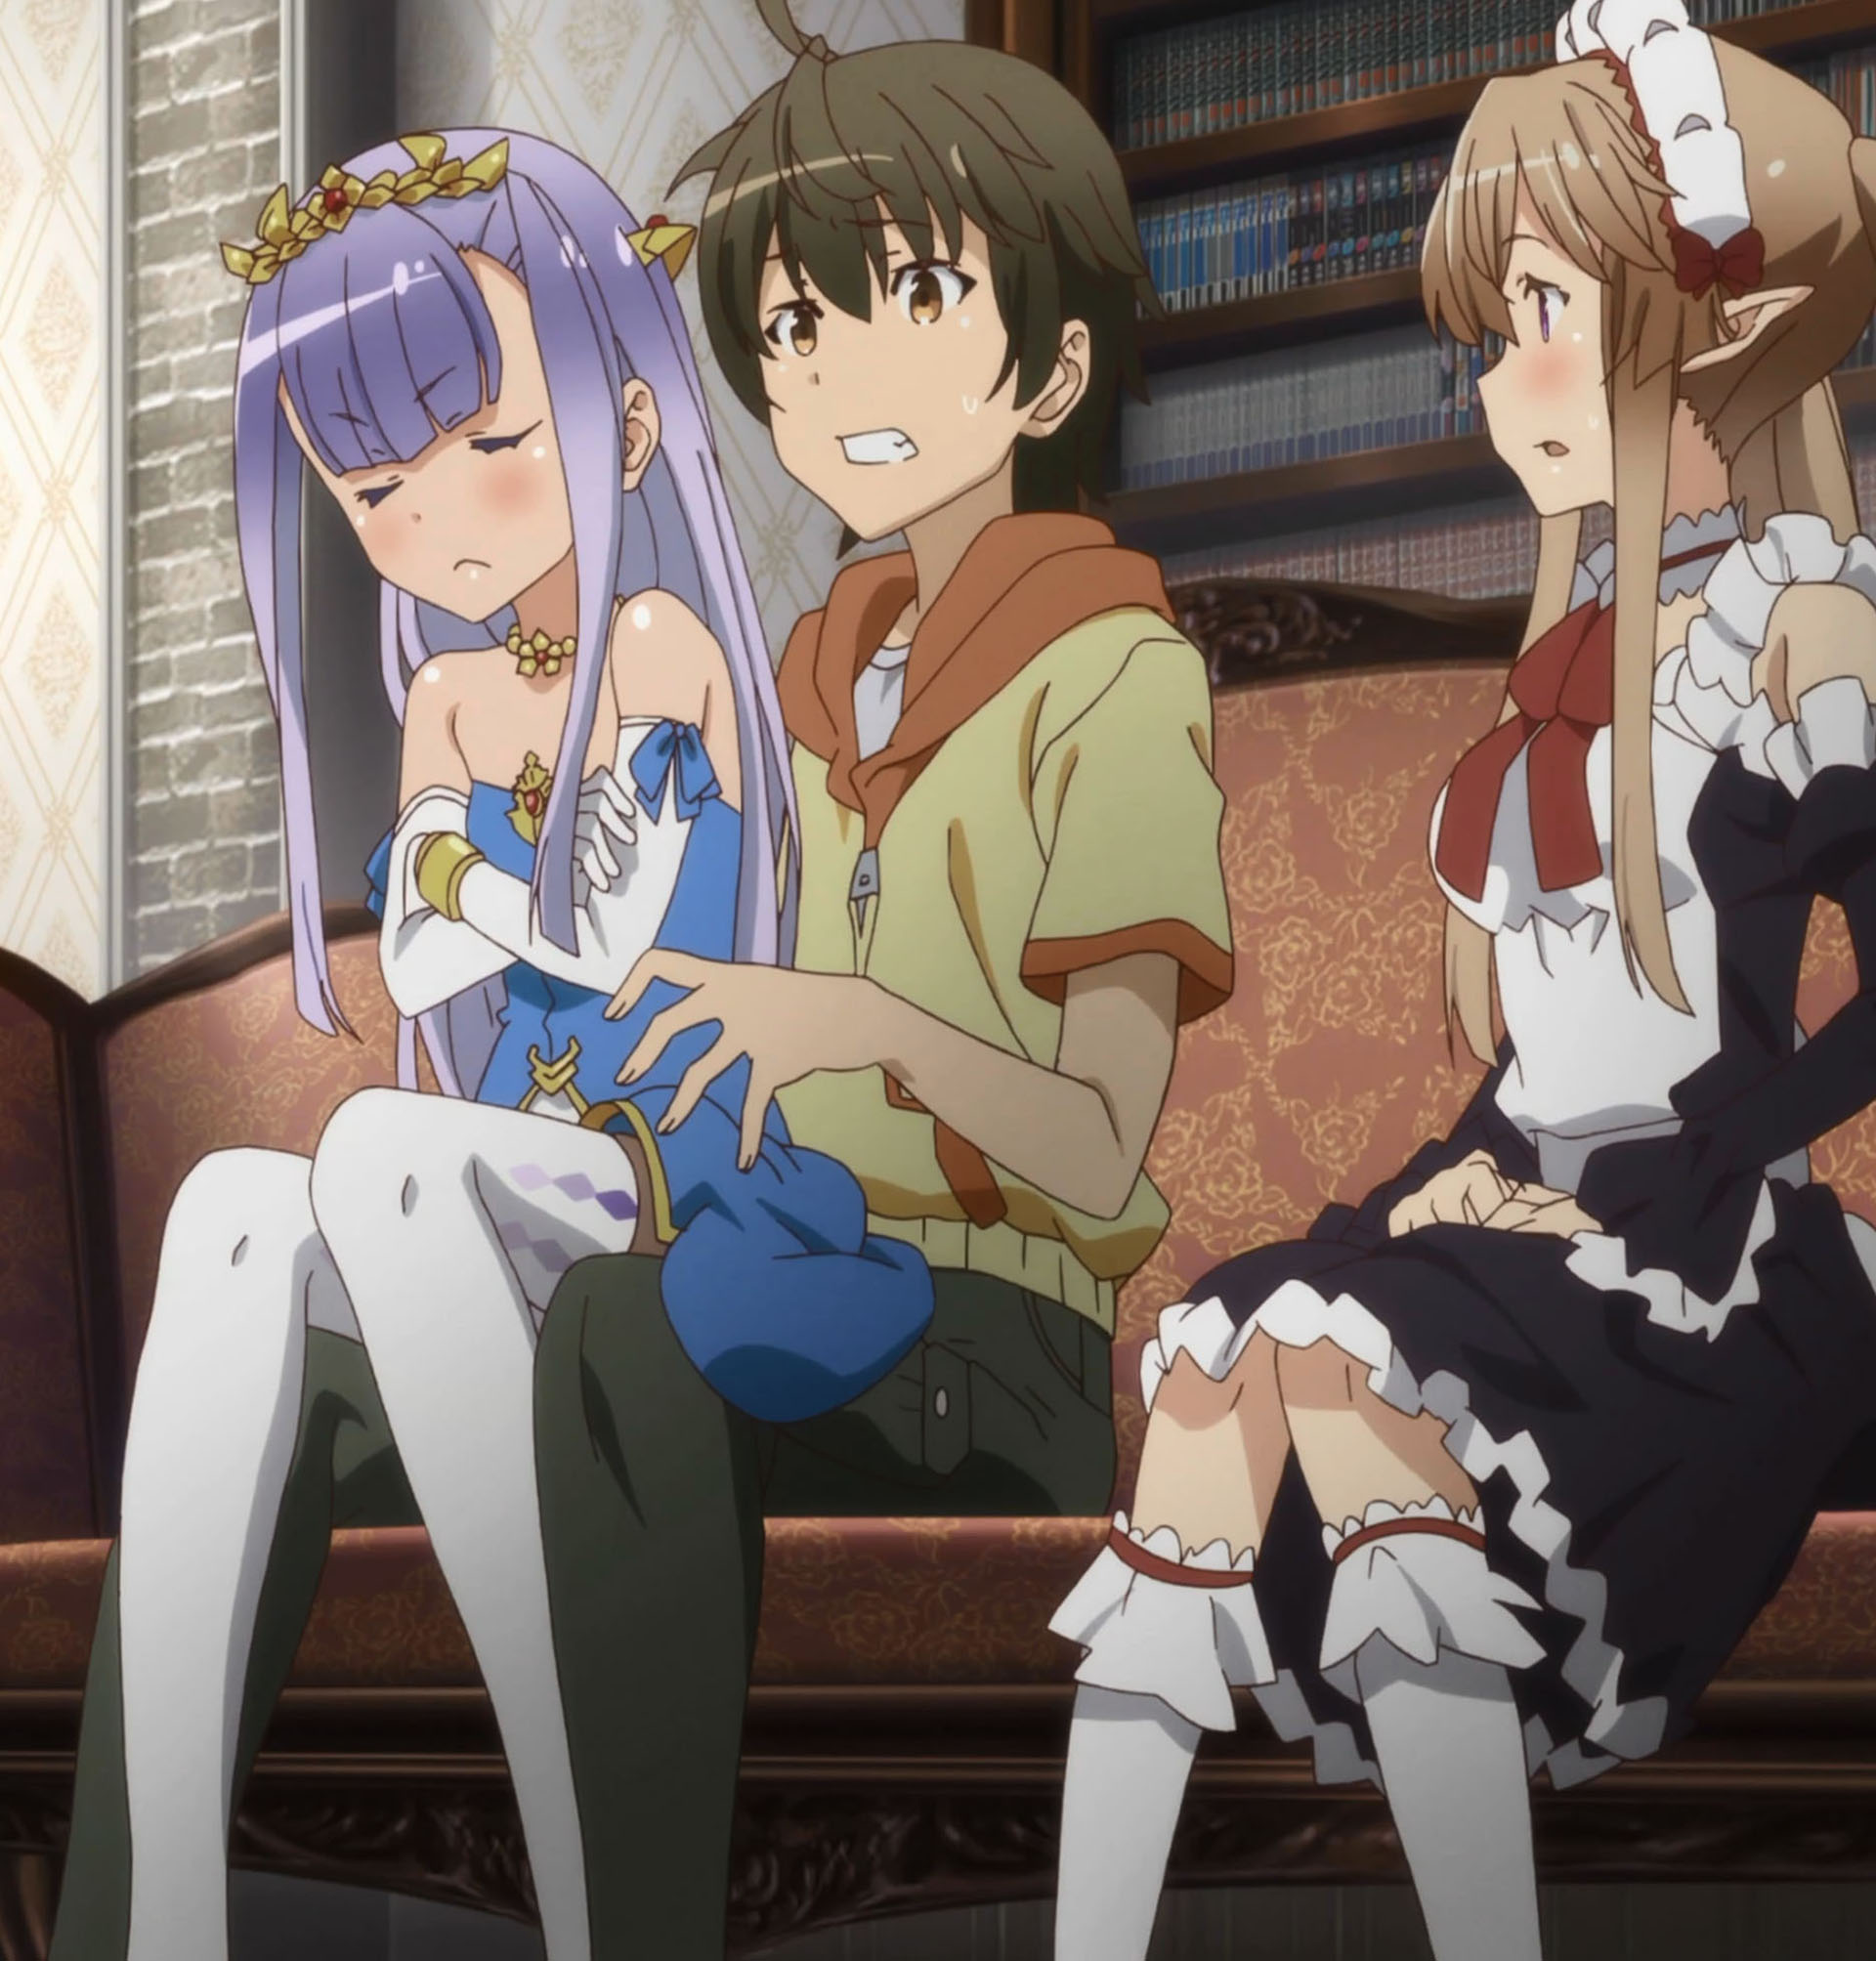 Outbreak Company | A Light Isekai Anime Review – Pinned Up Ink